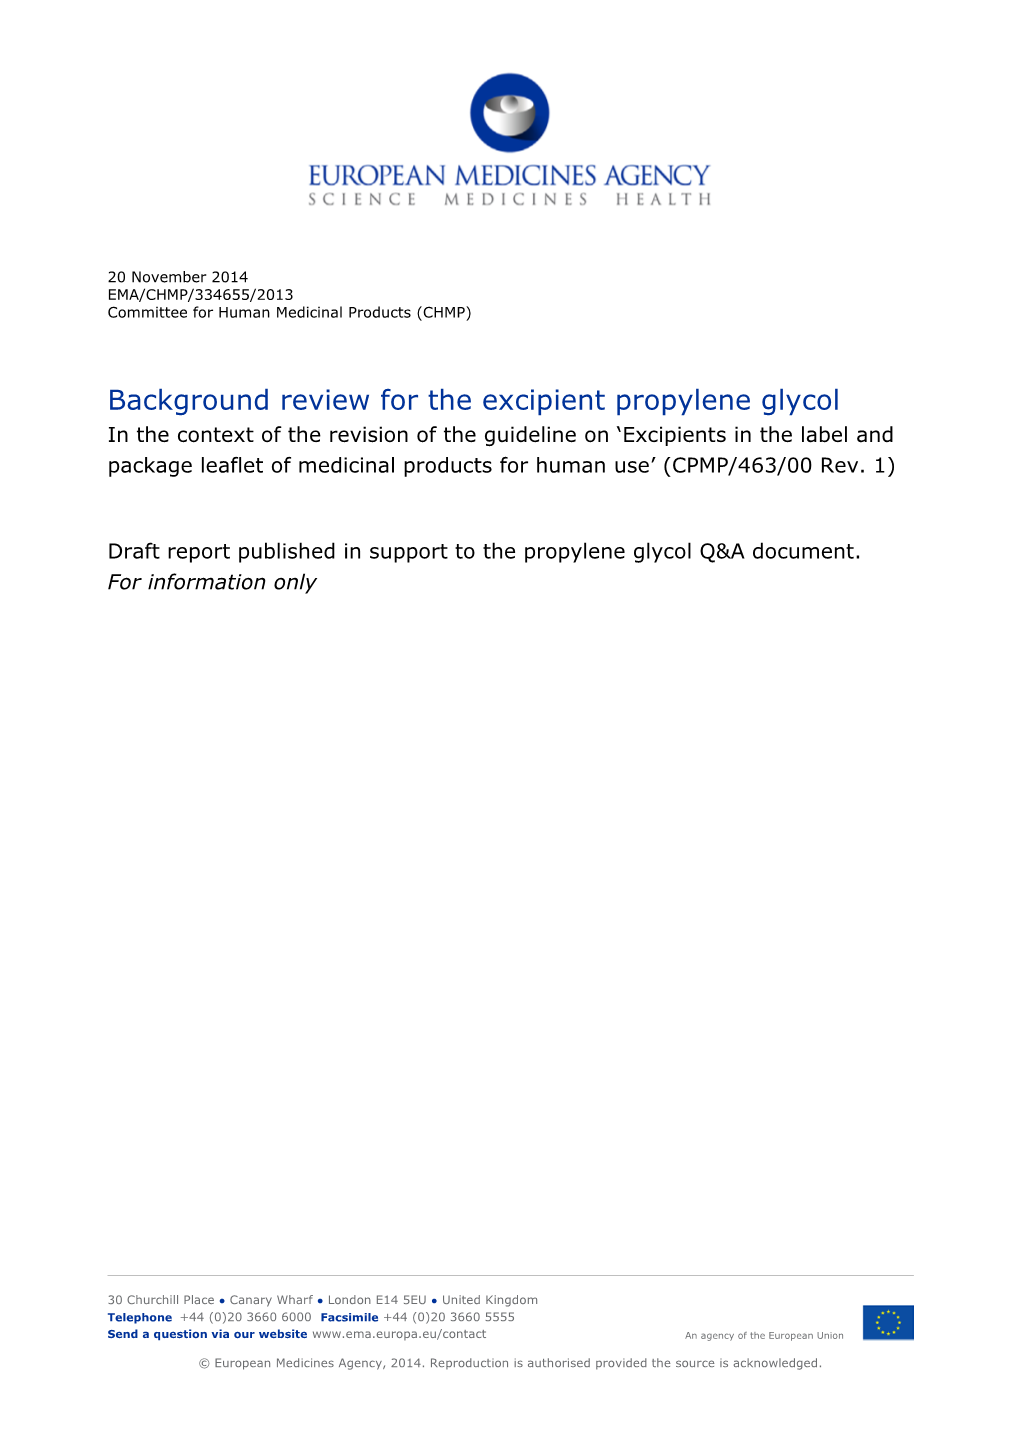 Background Review for the Excipient Propylene Glycol